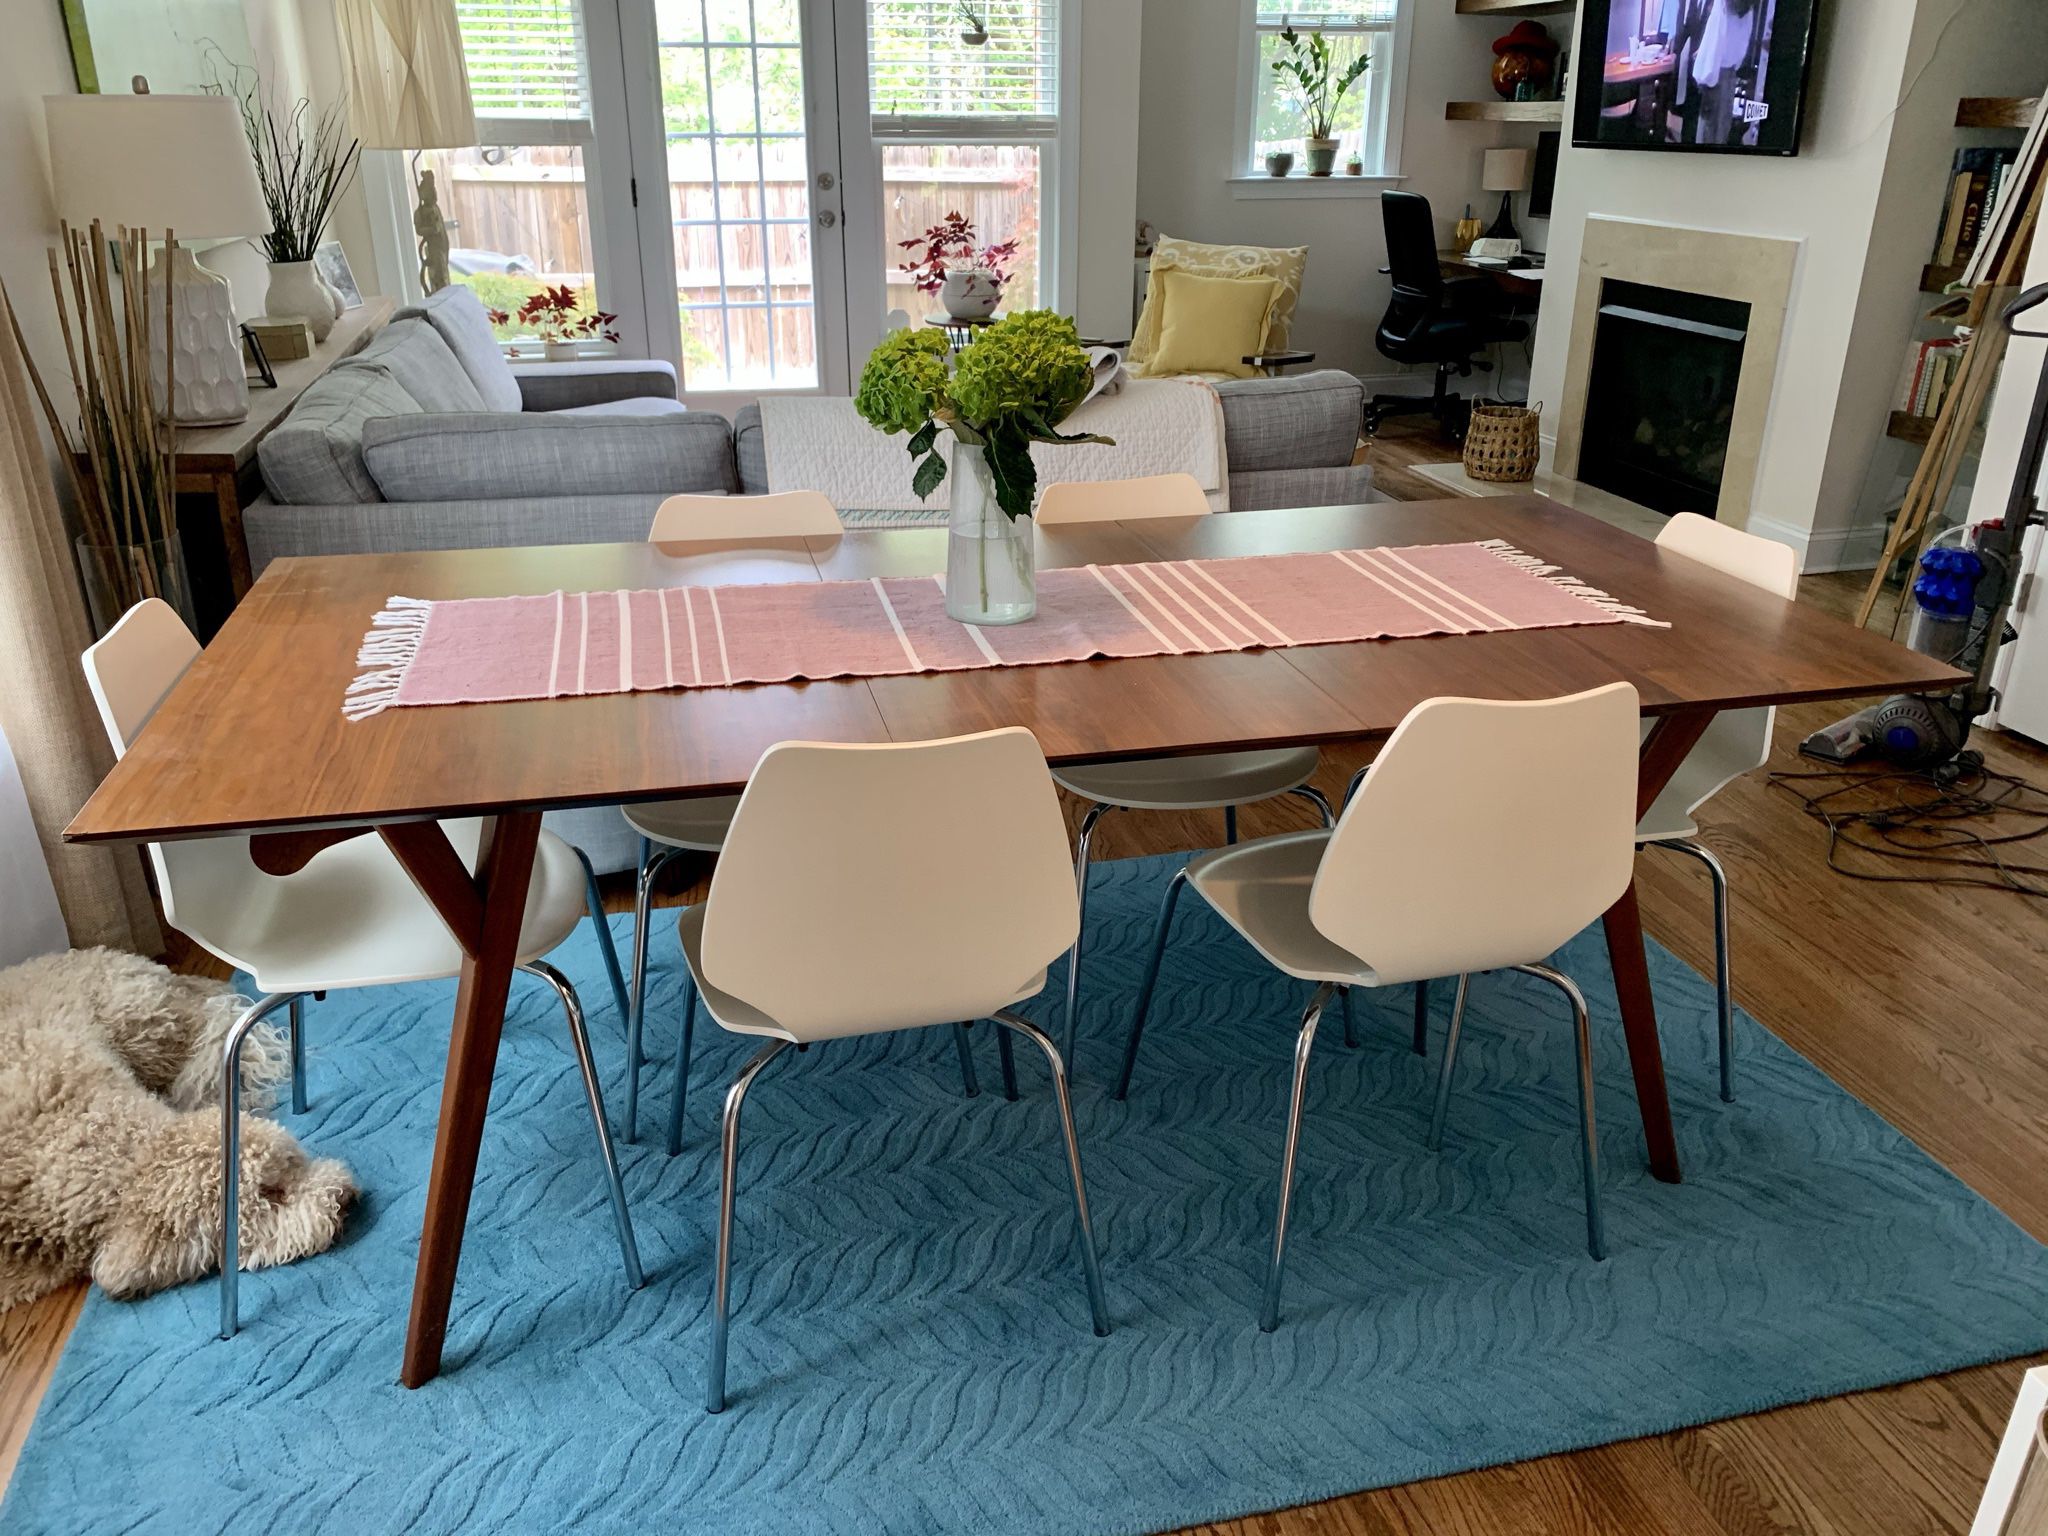 West Elm Dining Room Table Inspiration